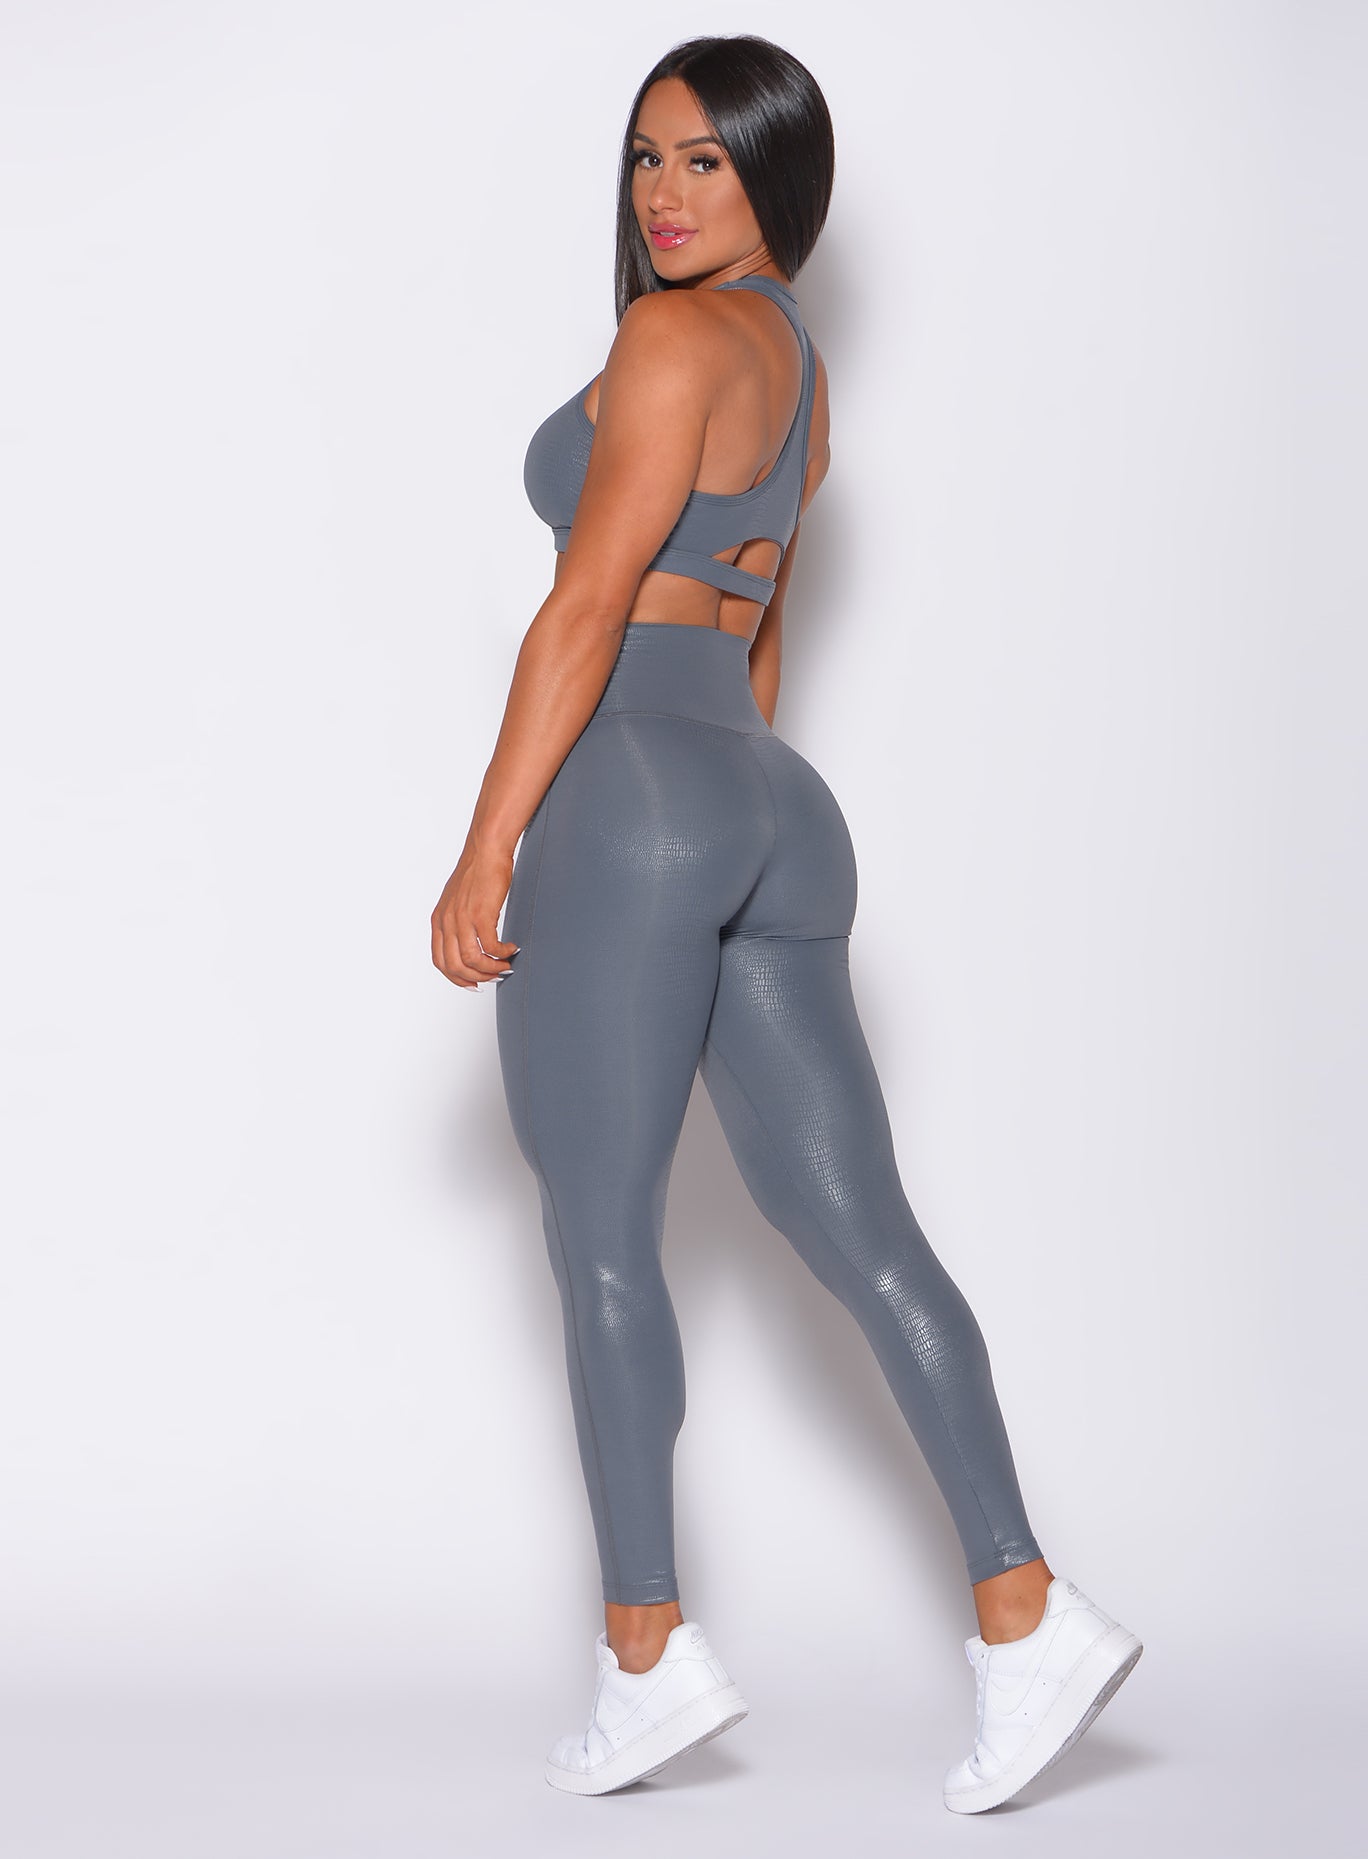 Left side profile view of a model facing to her left wearing our shine leggings in gray python color and a matching bra